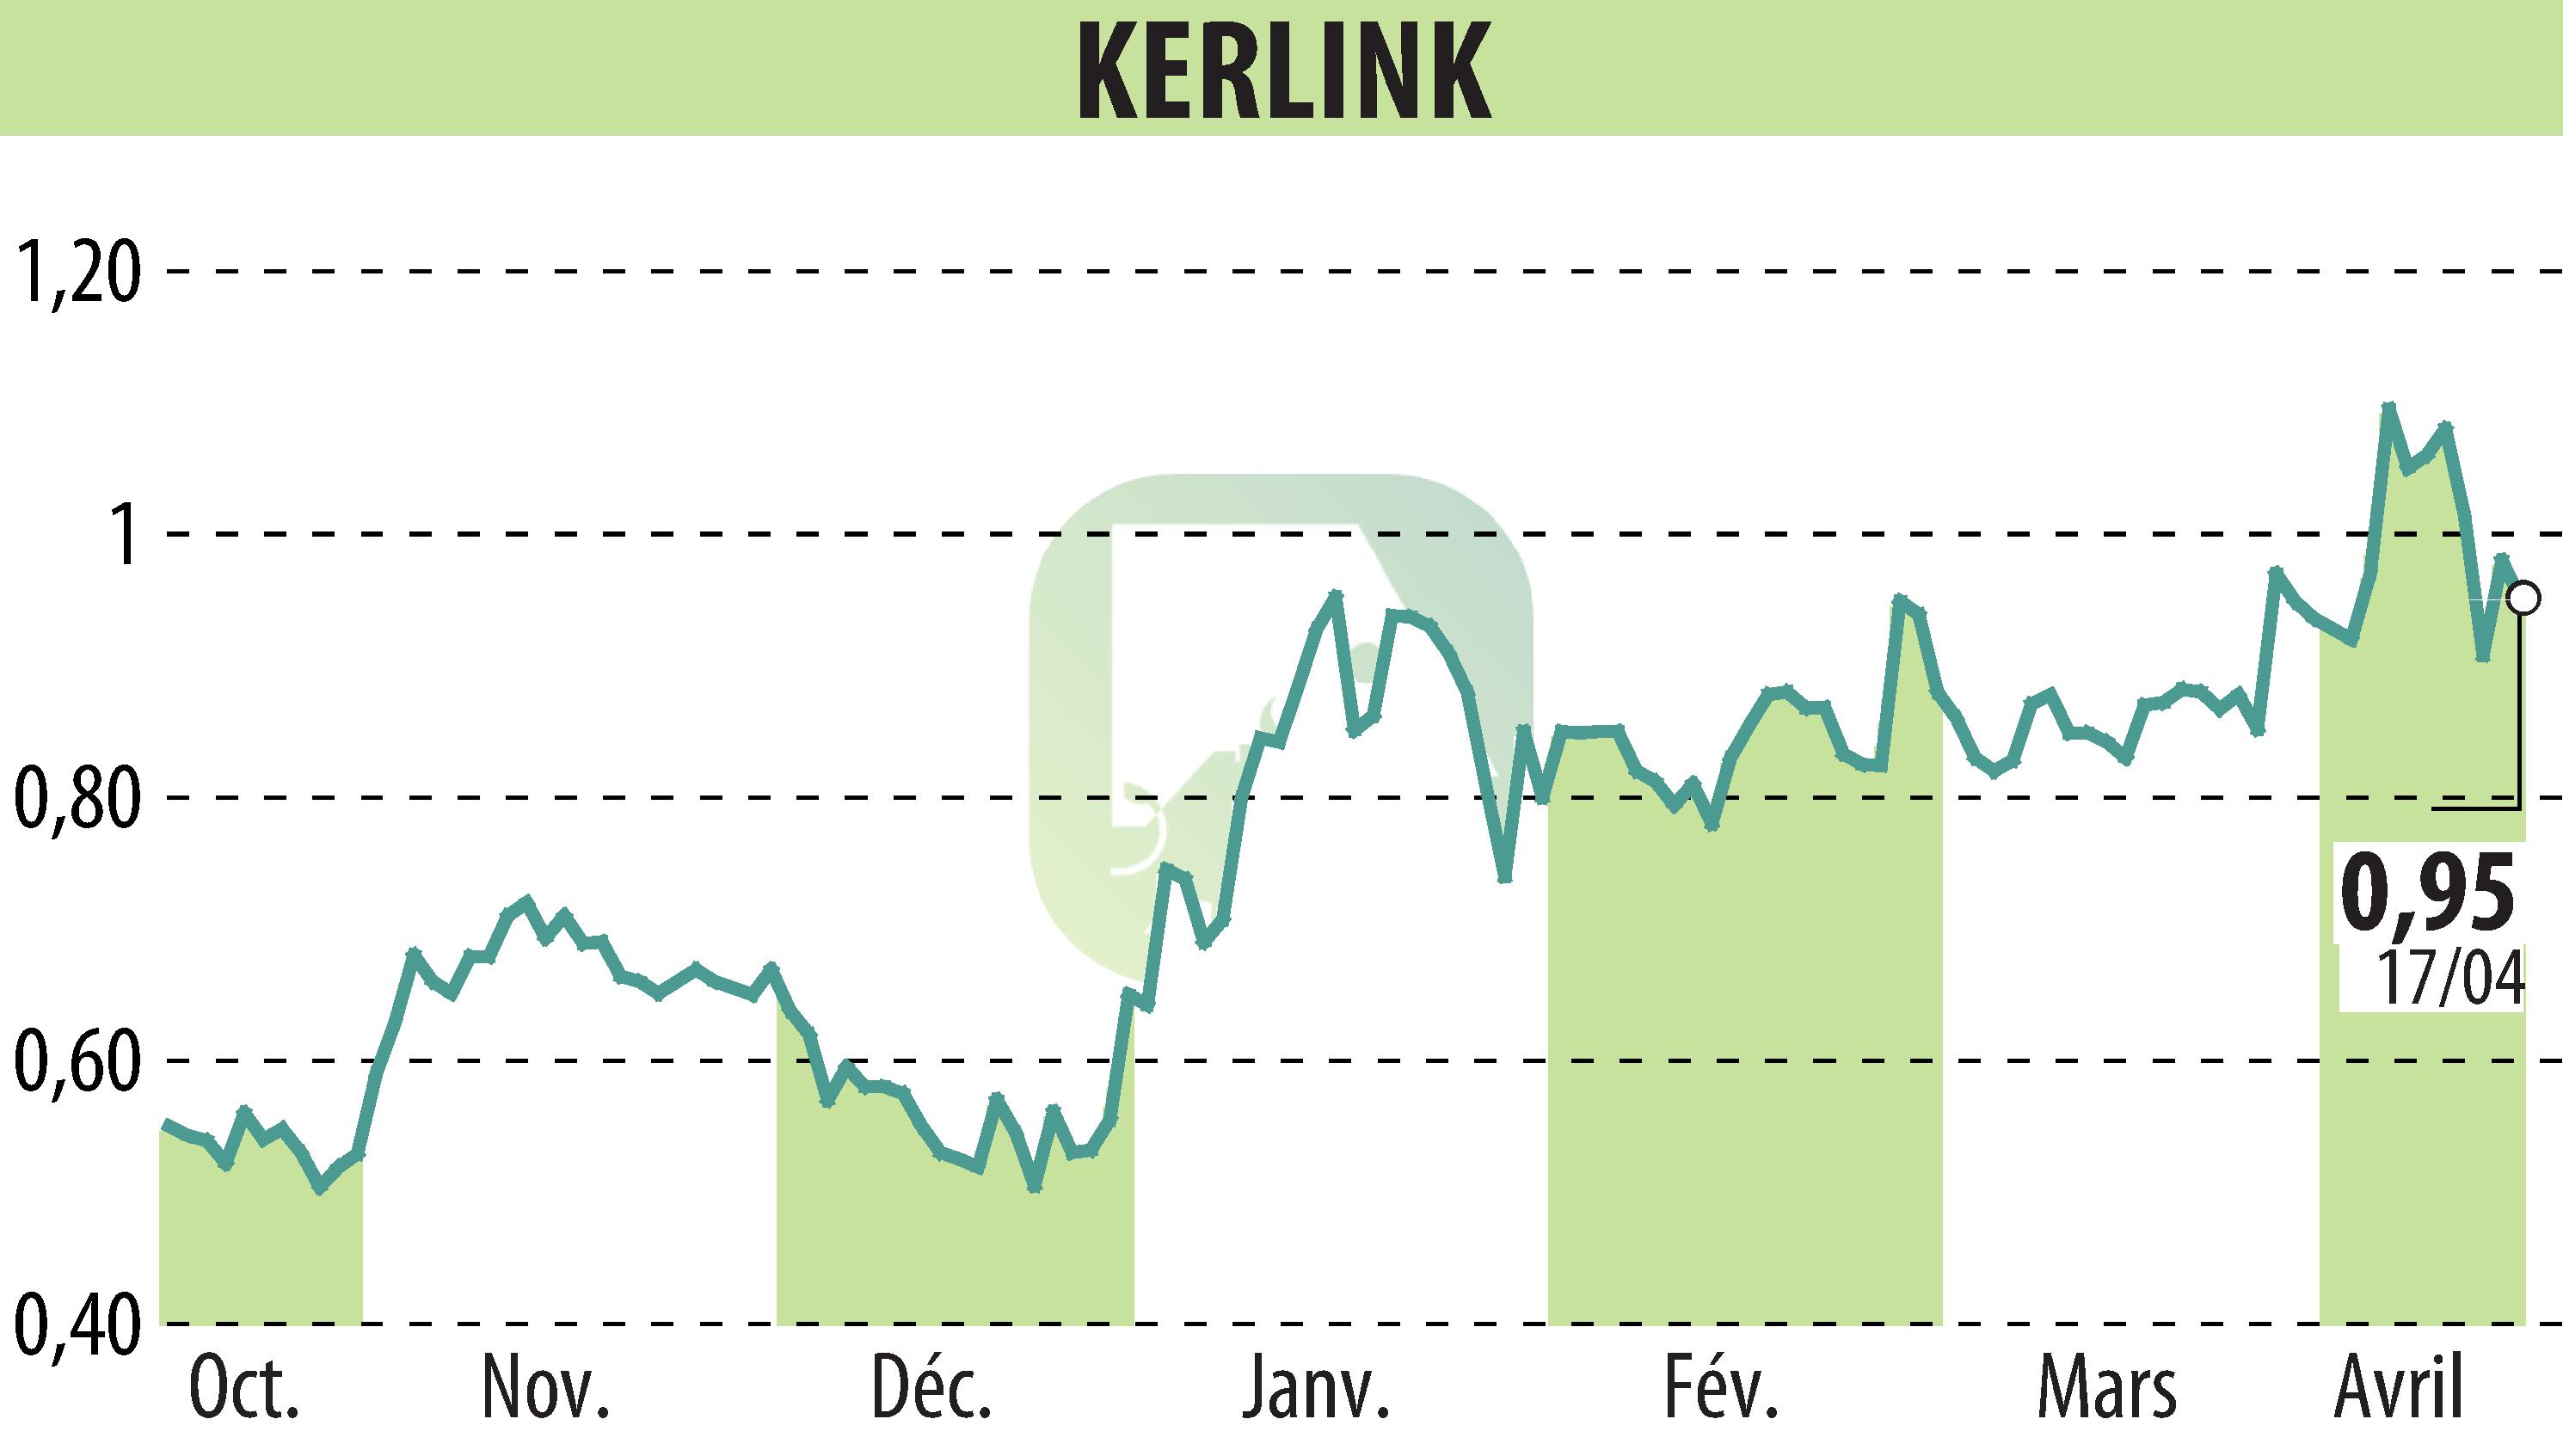 Stock price chart of KERLINK (EPA:ALKLK) showing fluctuations.